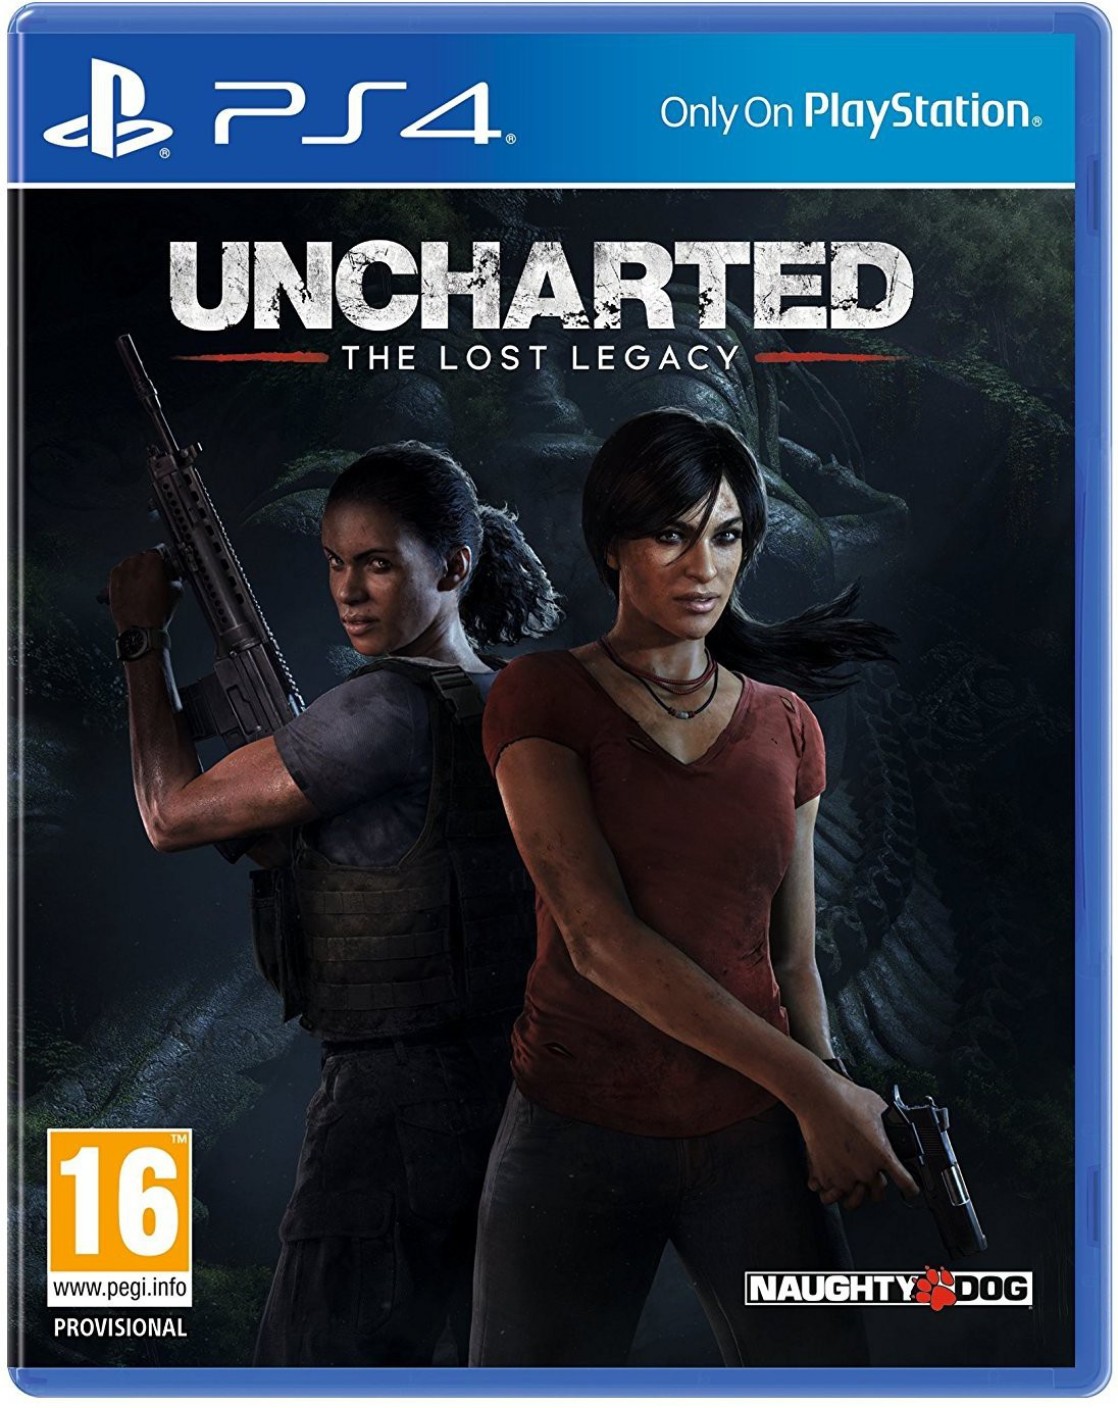 standard-edition-uncharted-the-lost-legacy-full-game-ps4-original-imaet5qhgedfm778.jpeg